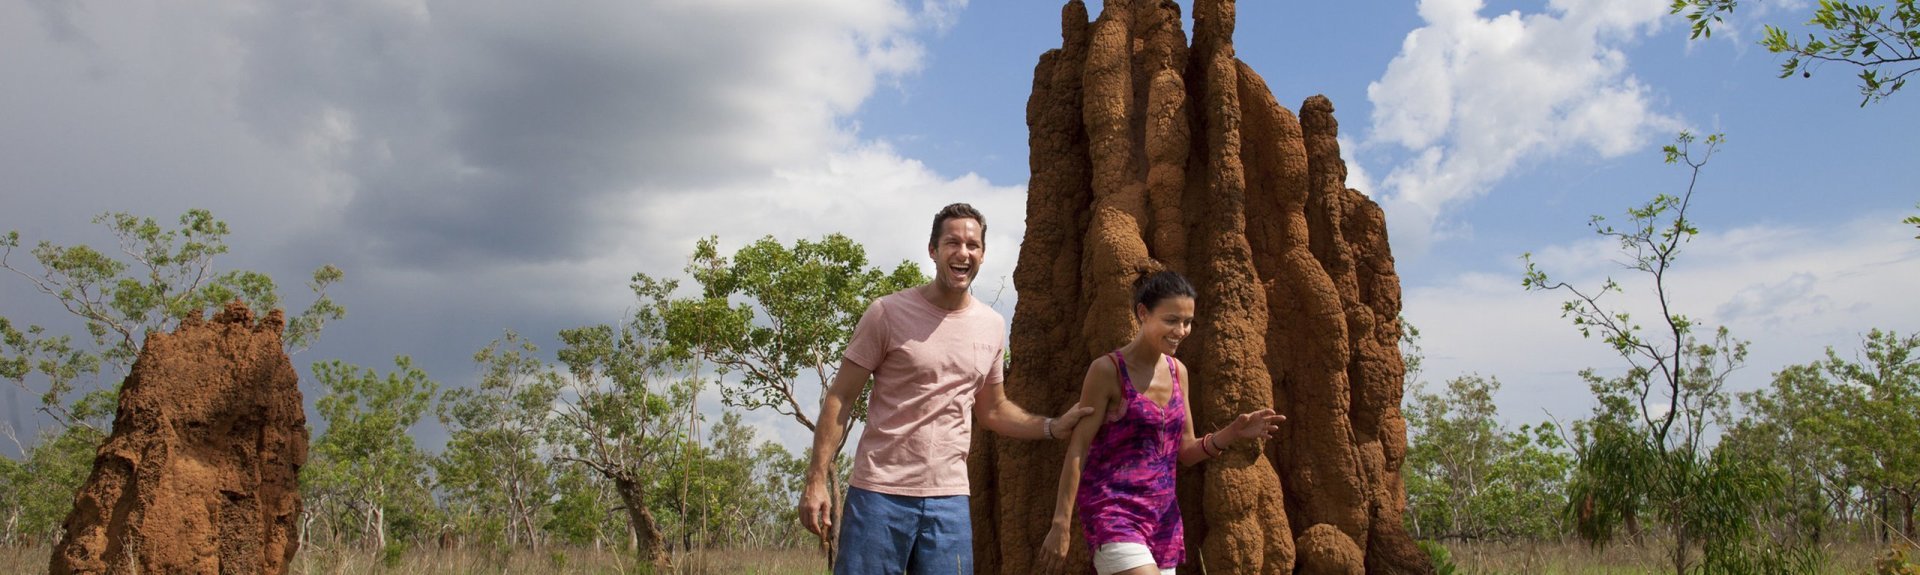 Termite mounds. Photo: Peter Eve, Tourism NT